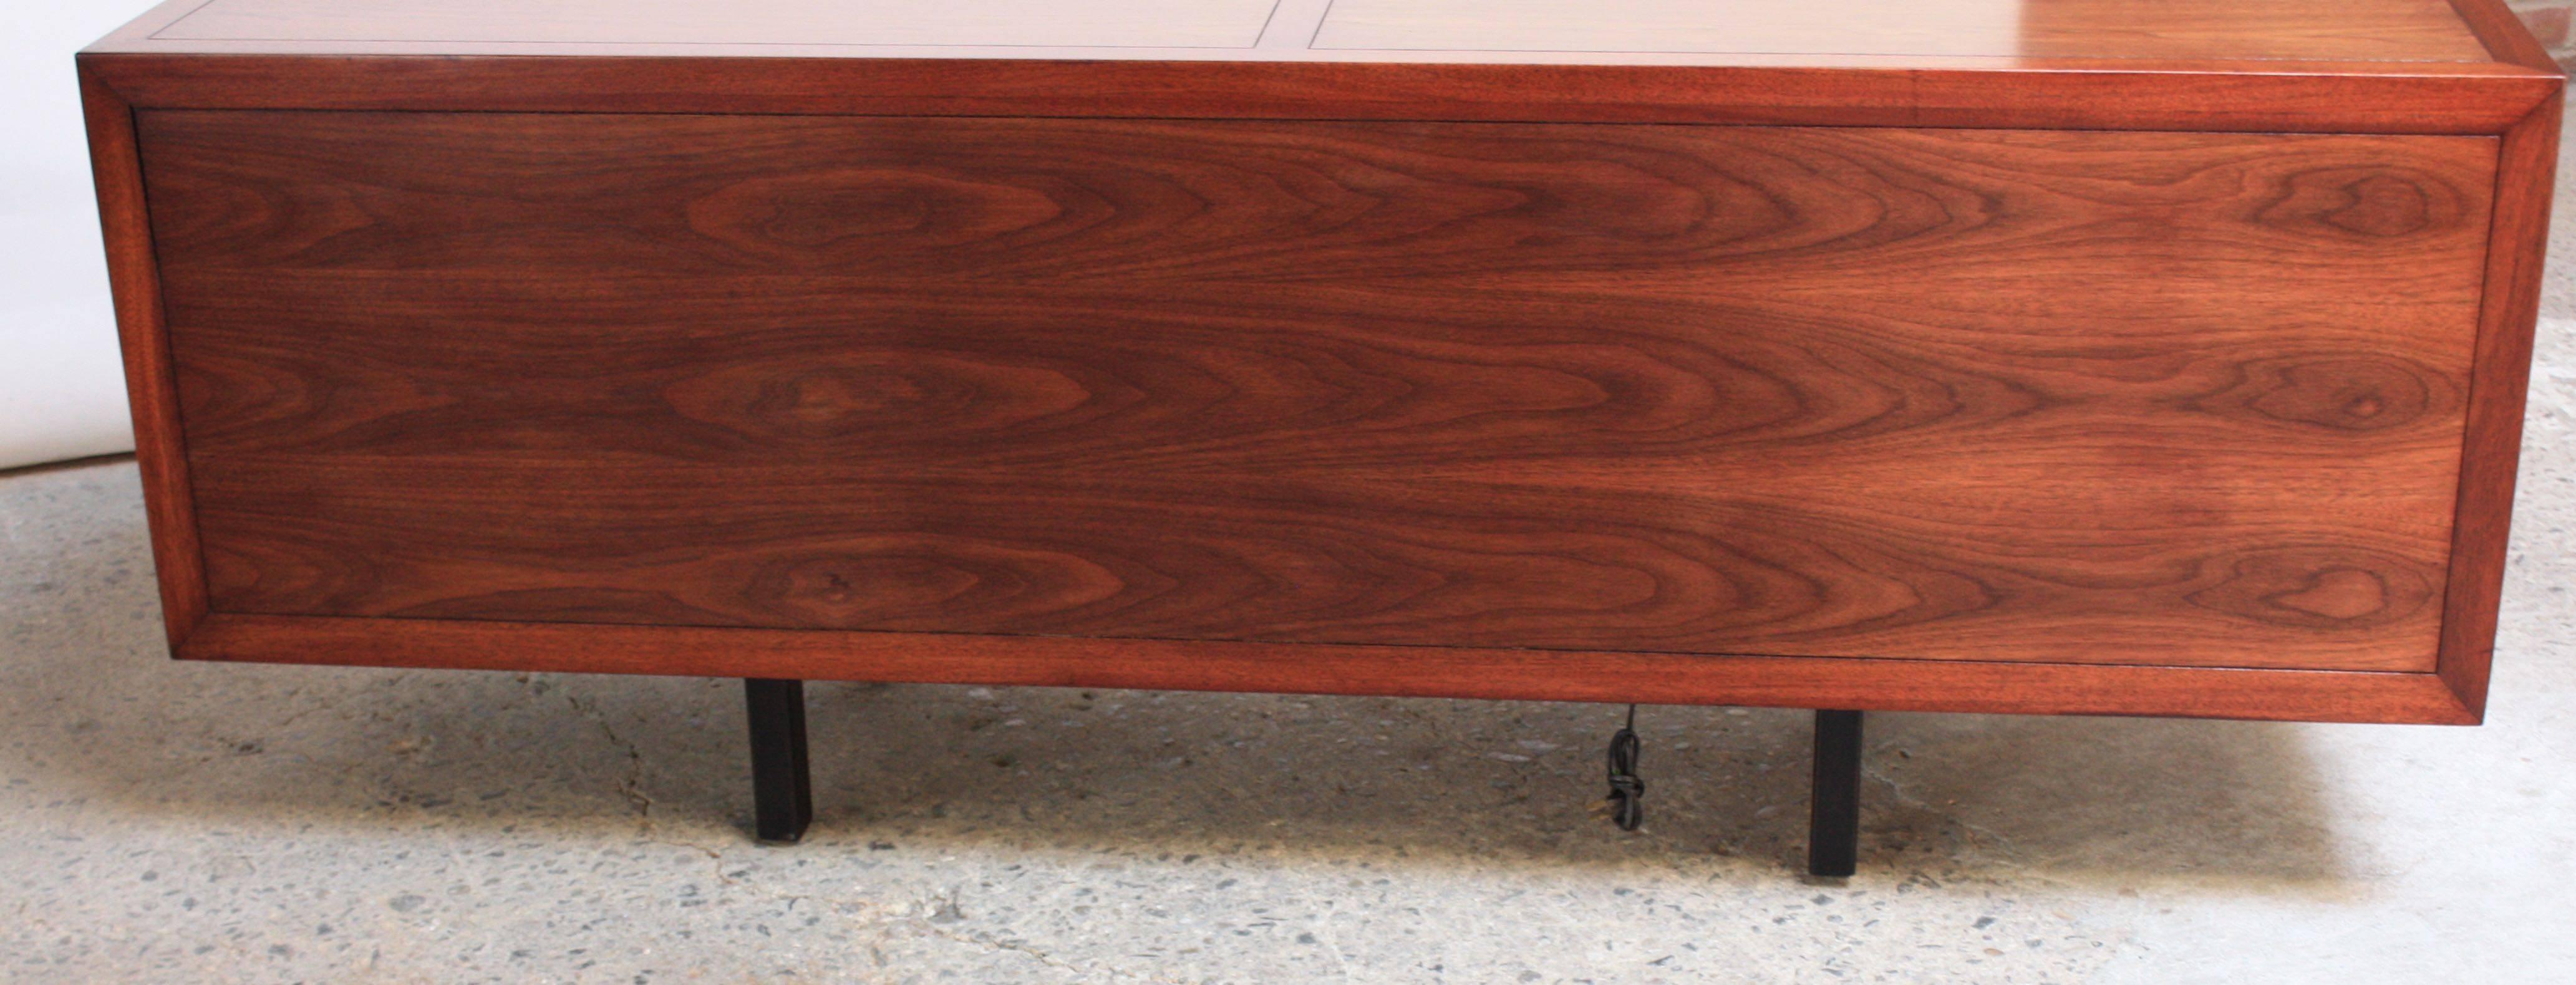 American 1970s Walnut, Bamboo and Cherry Credenza after Harvey Probber